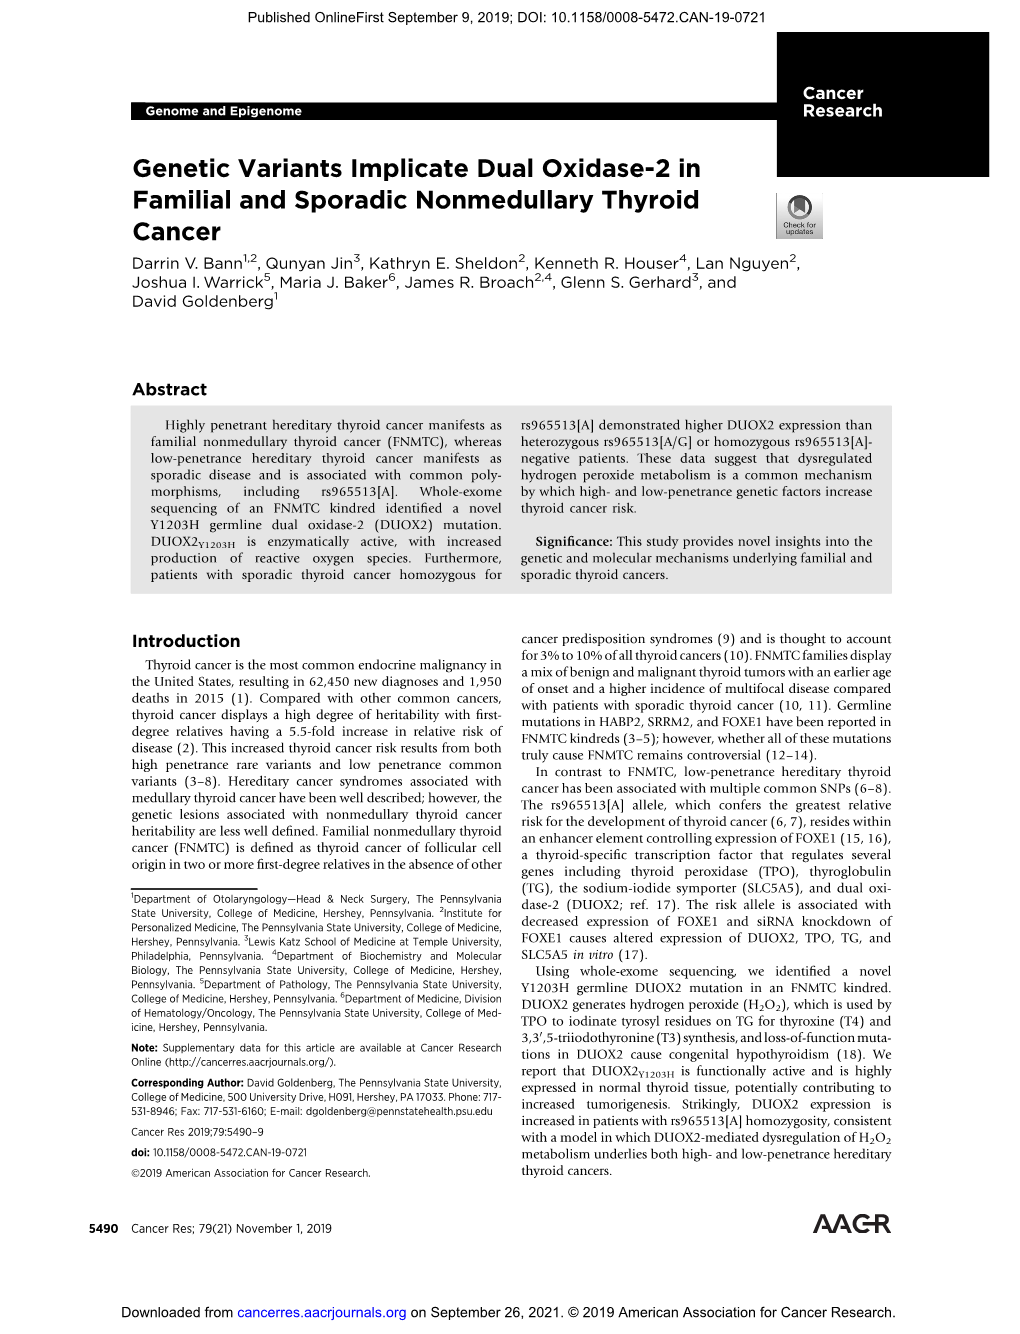 Genetic Variants Implicate Dual Oxidase-2 in Familial and Sporadic Nonmedullary Thyroid Cancer Darrin V